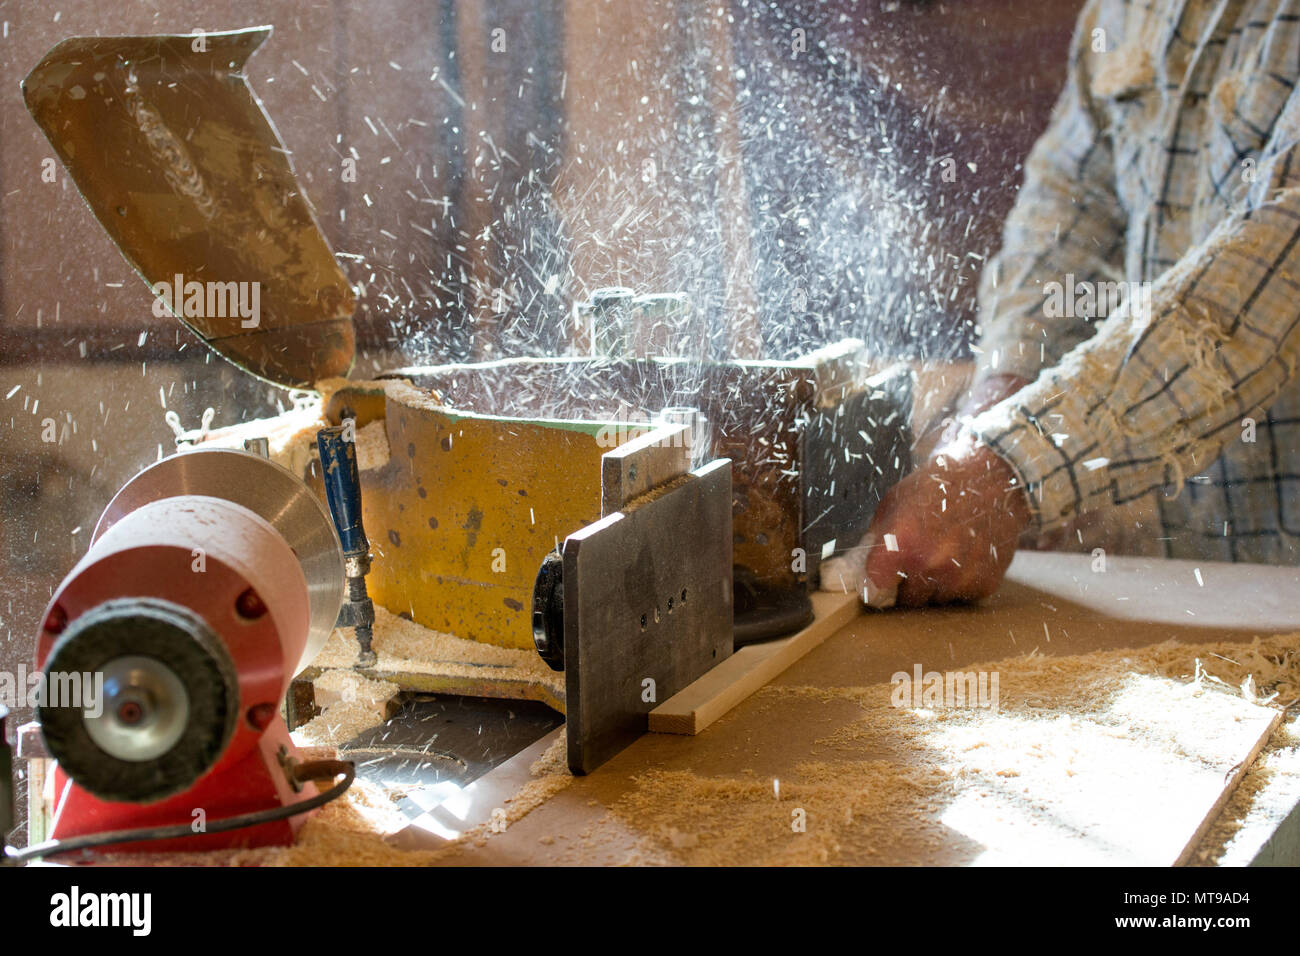 Carpenter tools on wooden table with sawdust. Circular Saw. Cutting a wooden plank Stock Photo